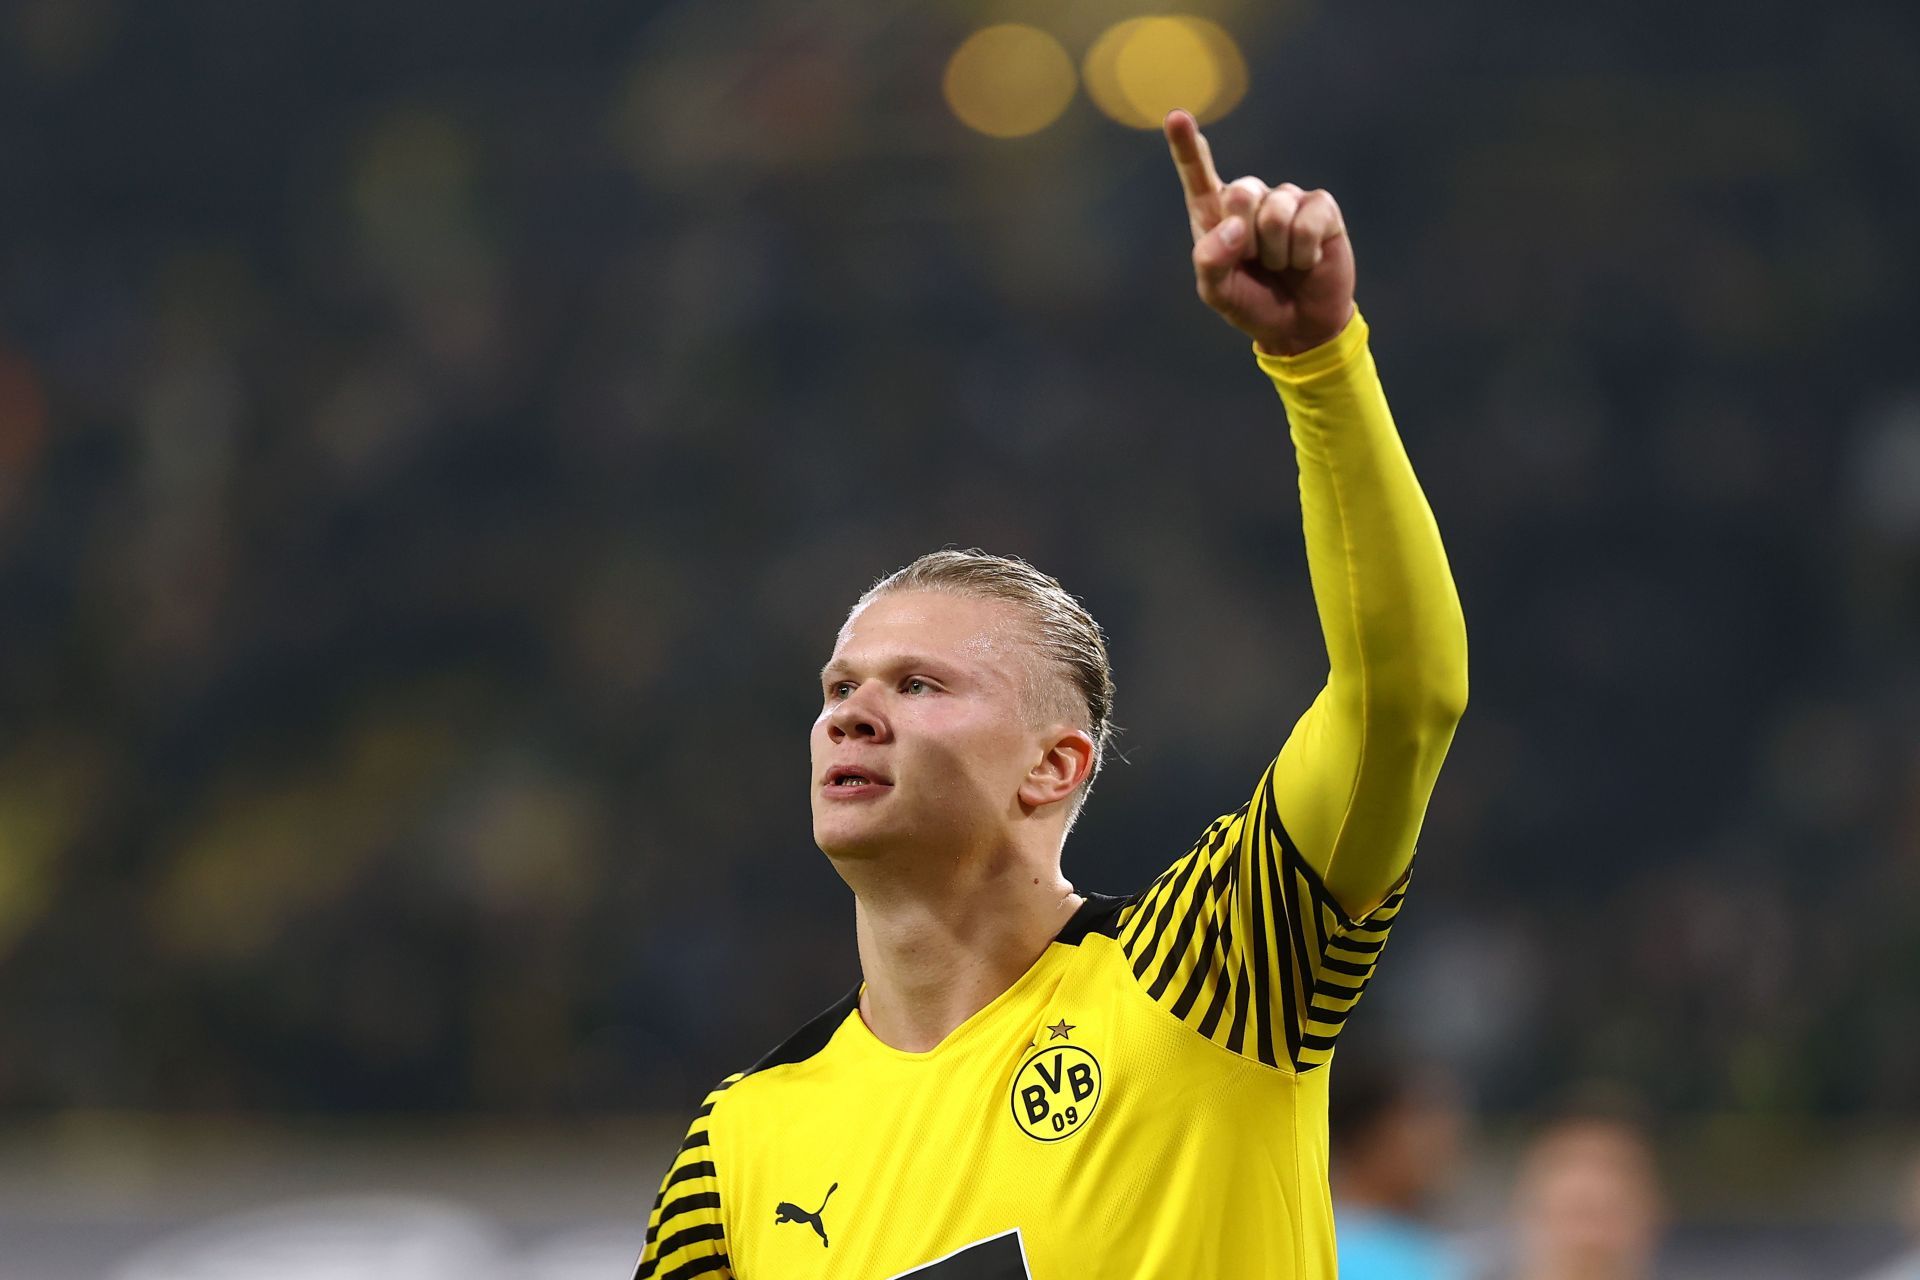 Erling Haaland is all set to leave Dortmund at the end of the season.